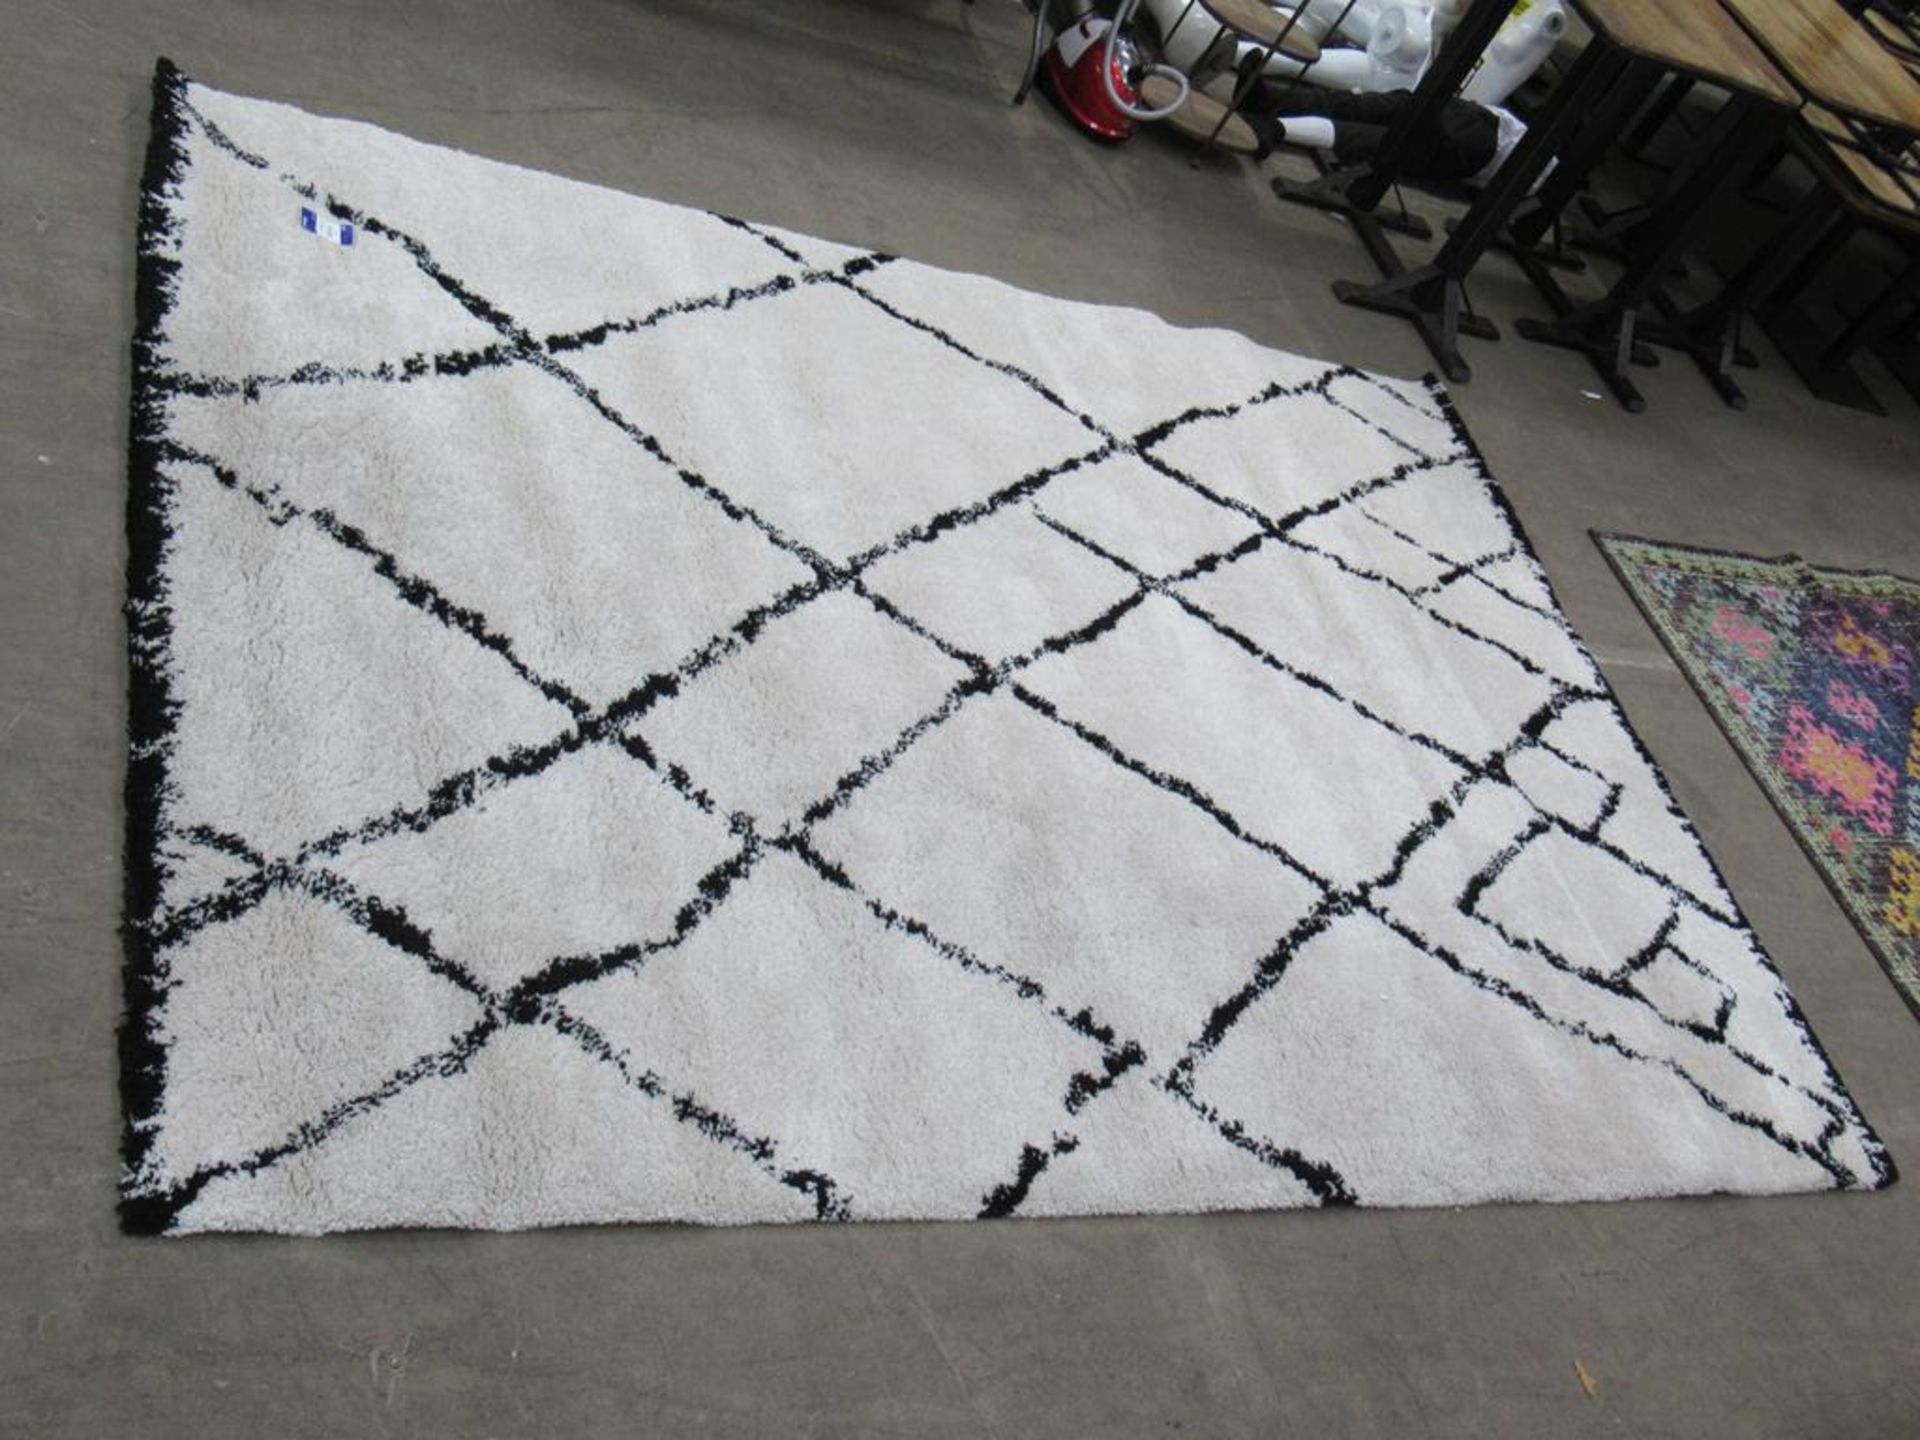 A LA Redoute "Royal Nordic Living" Cream and Black Rug